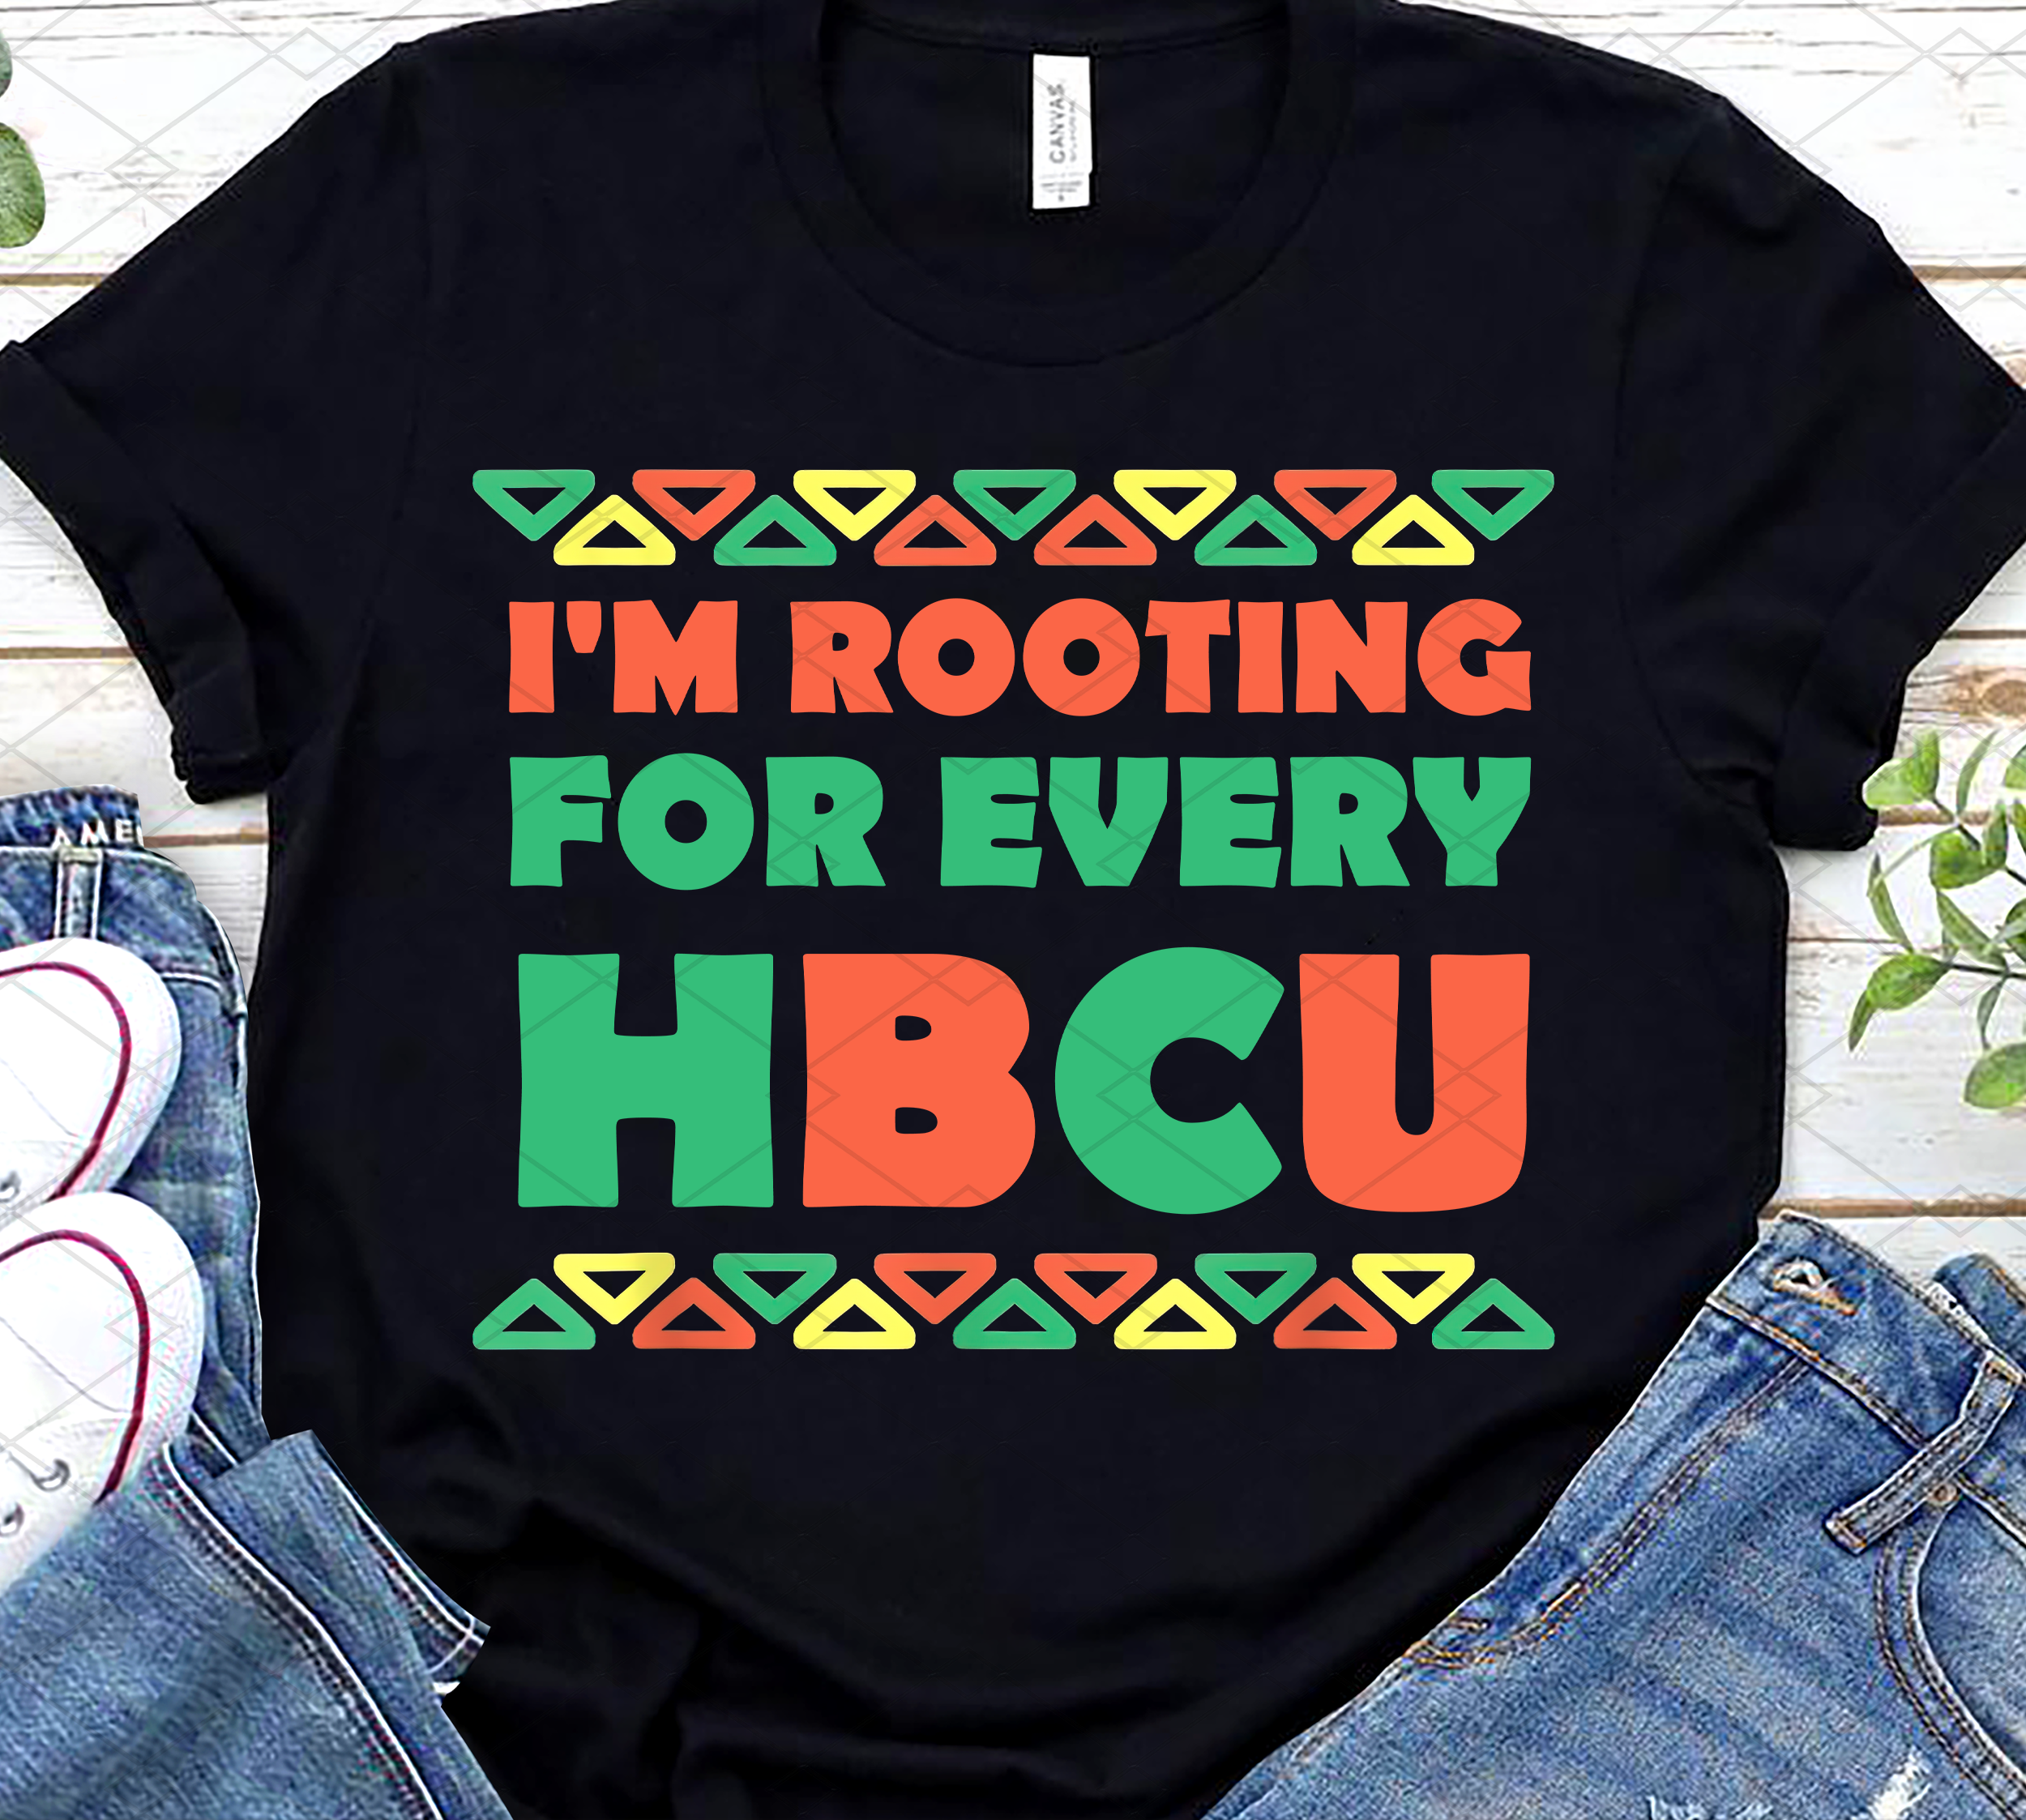 CRICUT FOR BEGINNERS: HOW TO MAKE A LAYERED BLACK HISTORY T-SHIRT